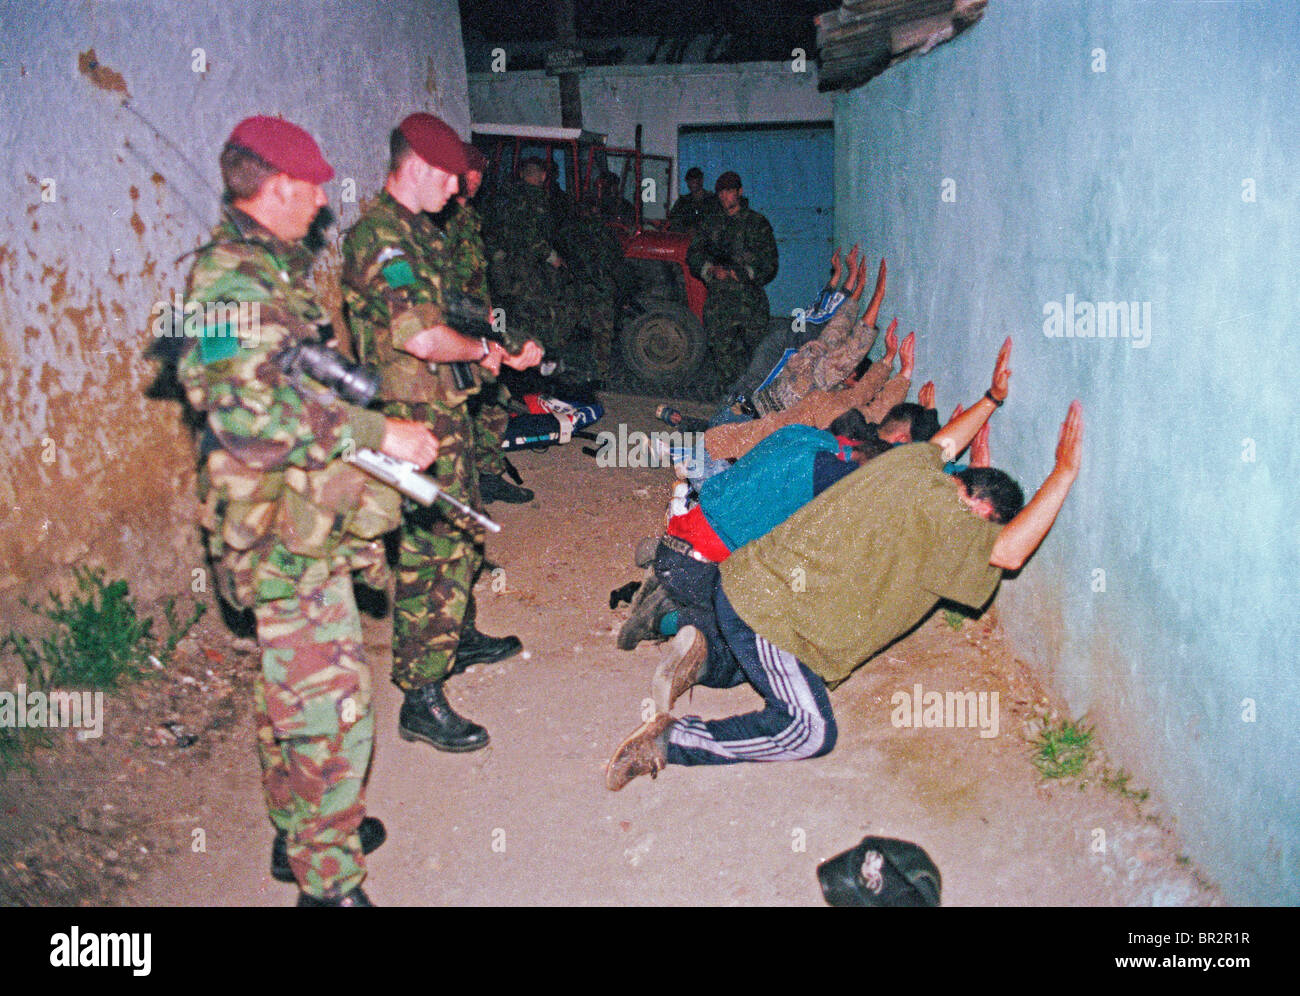 British Paratroopers capture suspected Albanian looters in Pristina Kosovo. Stock Photo